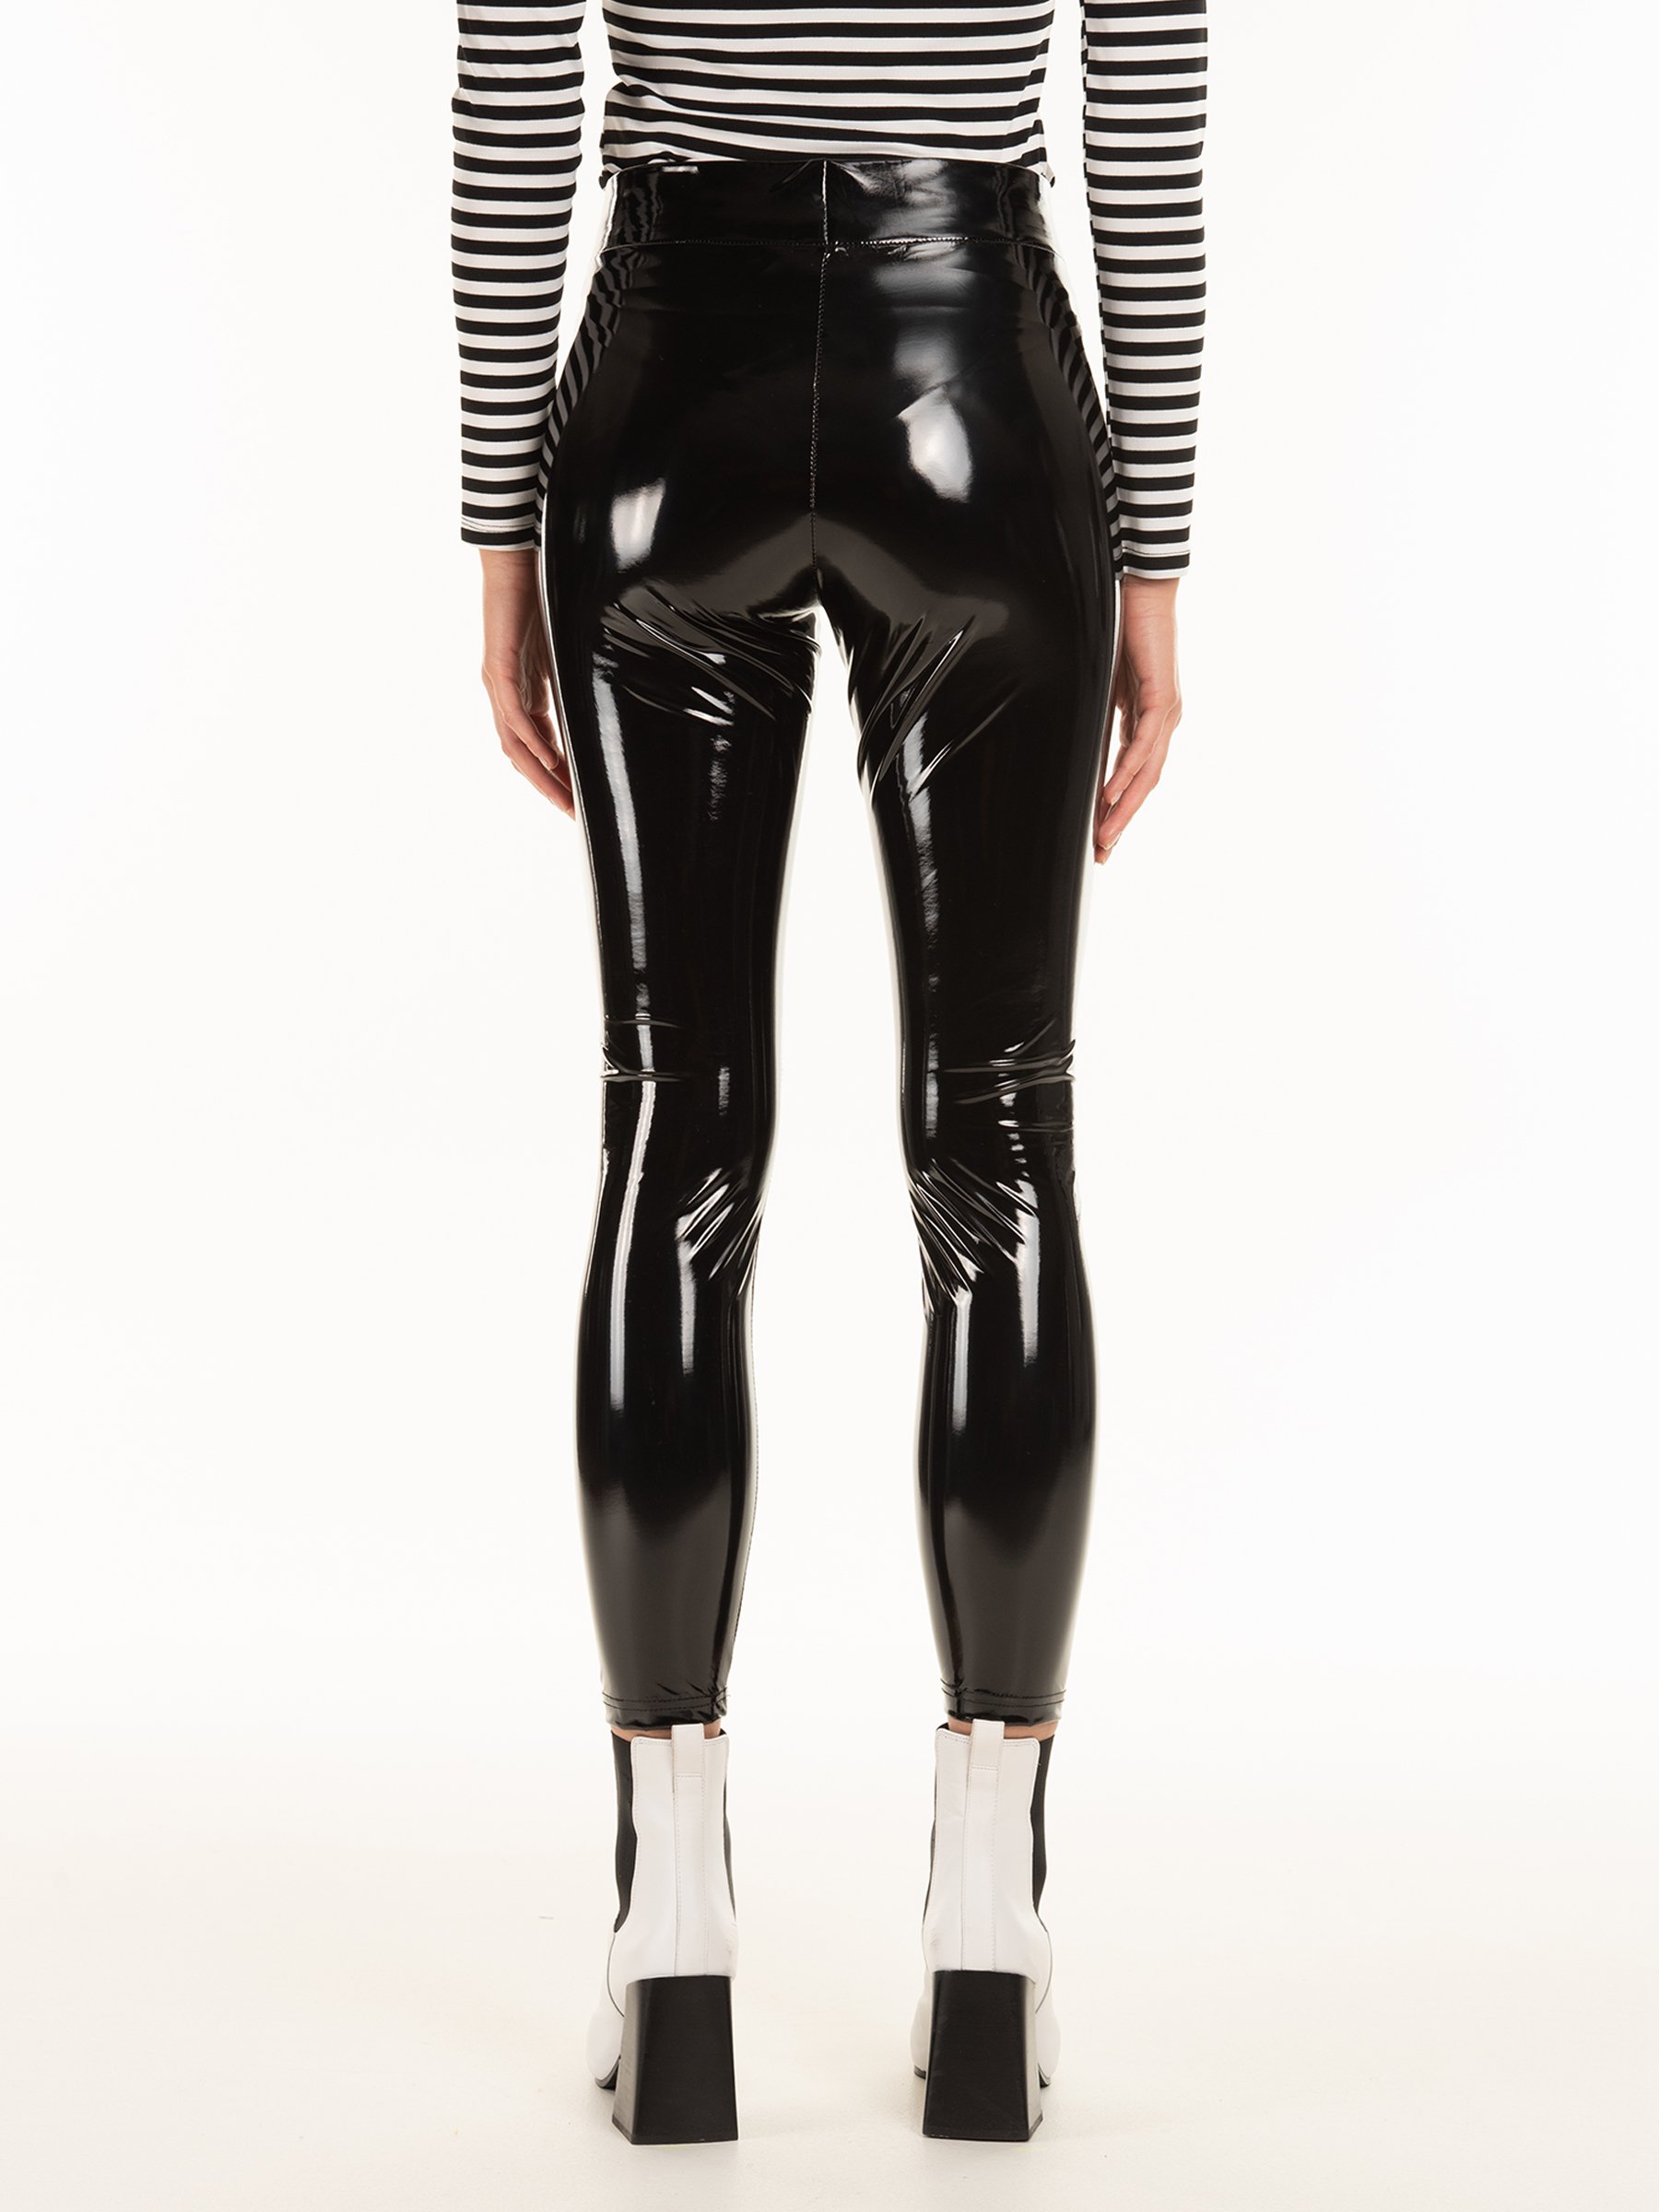 vinyl leggings women, vinyl leggings women Suppliers and